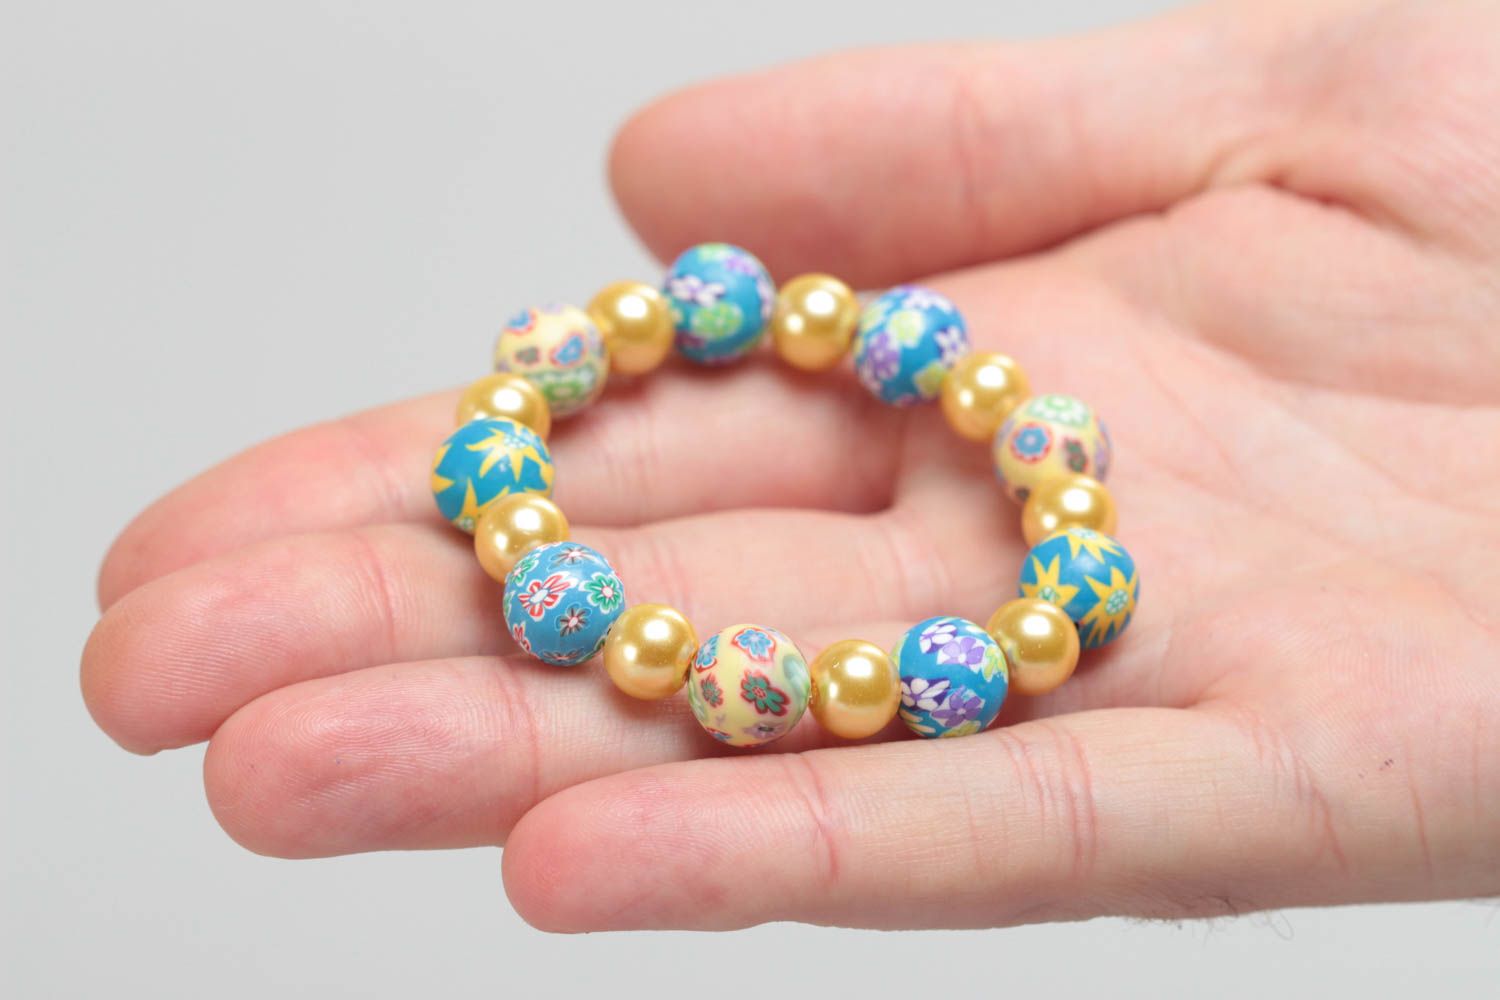 Homemade children's wrist bracelet created of polymer clay and ceramic beads photo 5